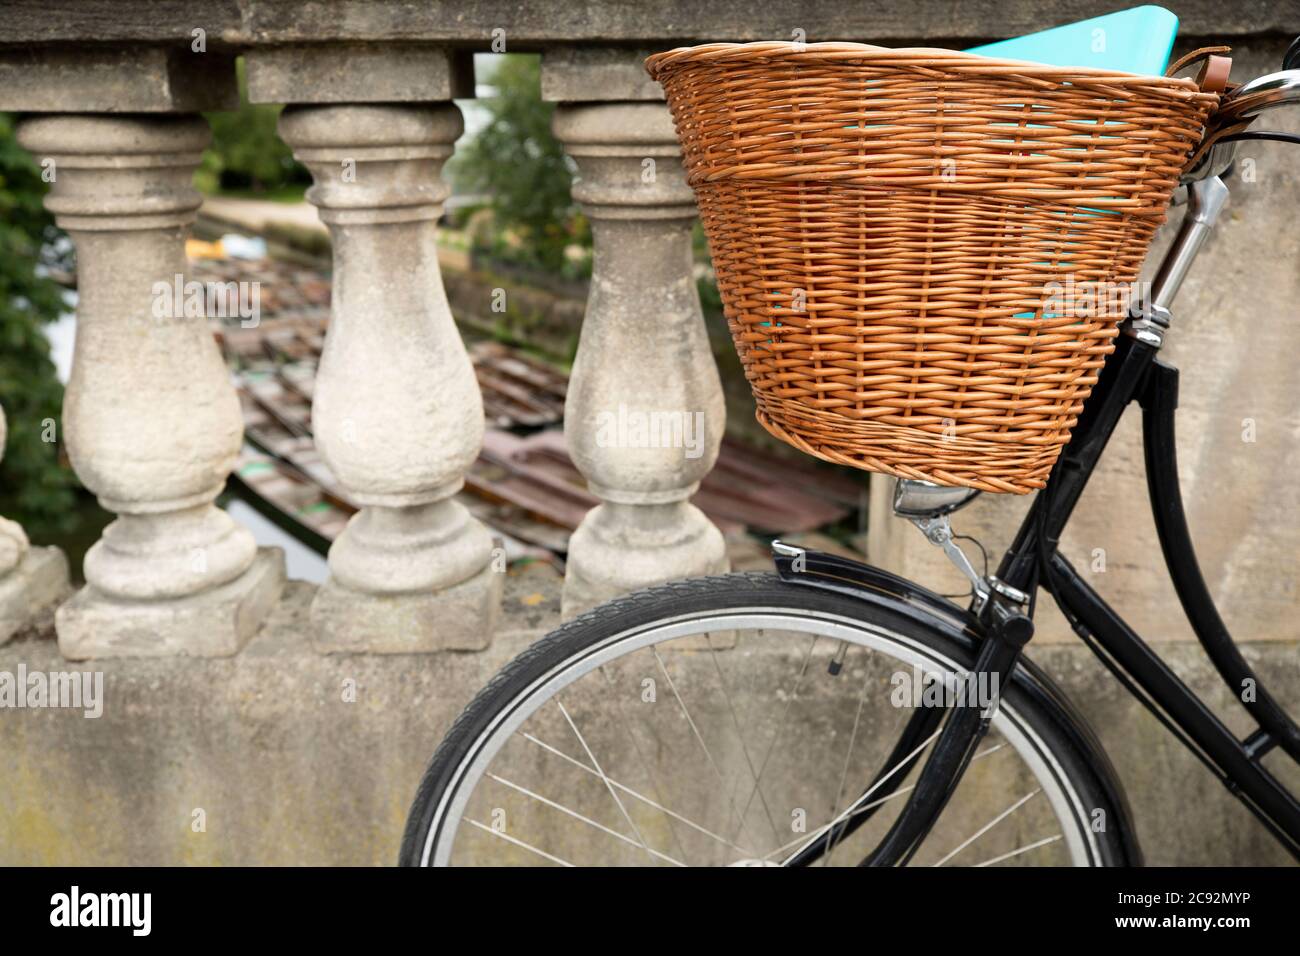 Old Fashioned Bicycle On Magdalen Bridge Over River Cherwell In Oxford With Punts Moored In Background Stock Photo